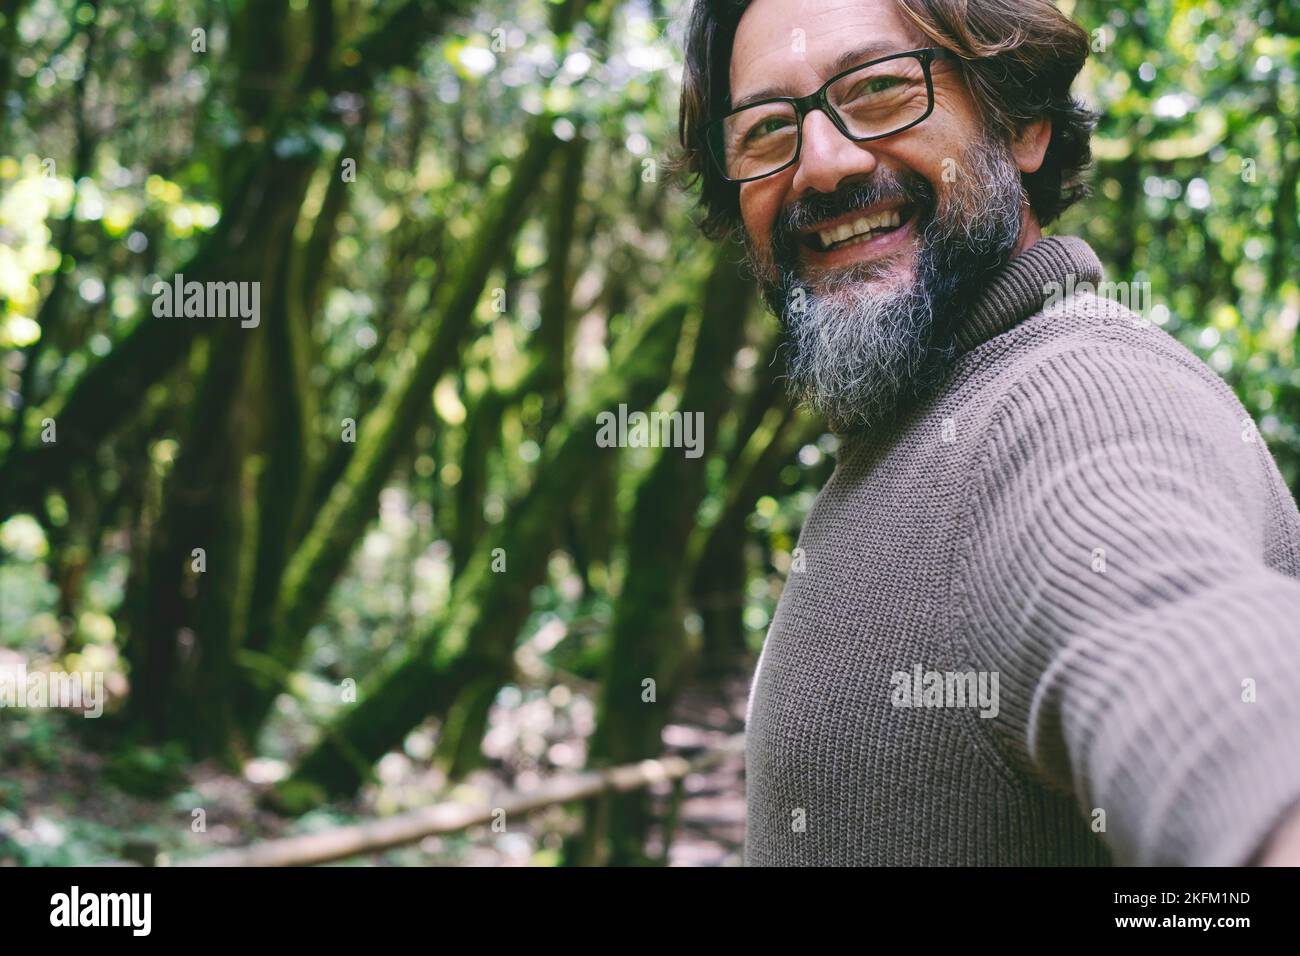 Pov view of man smiling and having fun with green nature trees and forest in background. People enjoying national park woods with friends or alone. En Stock Photo